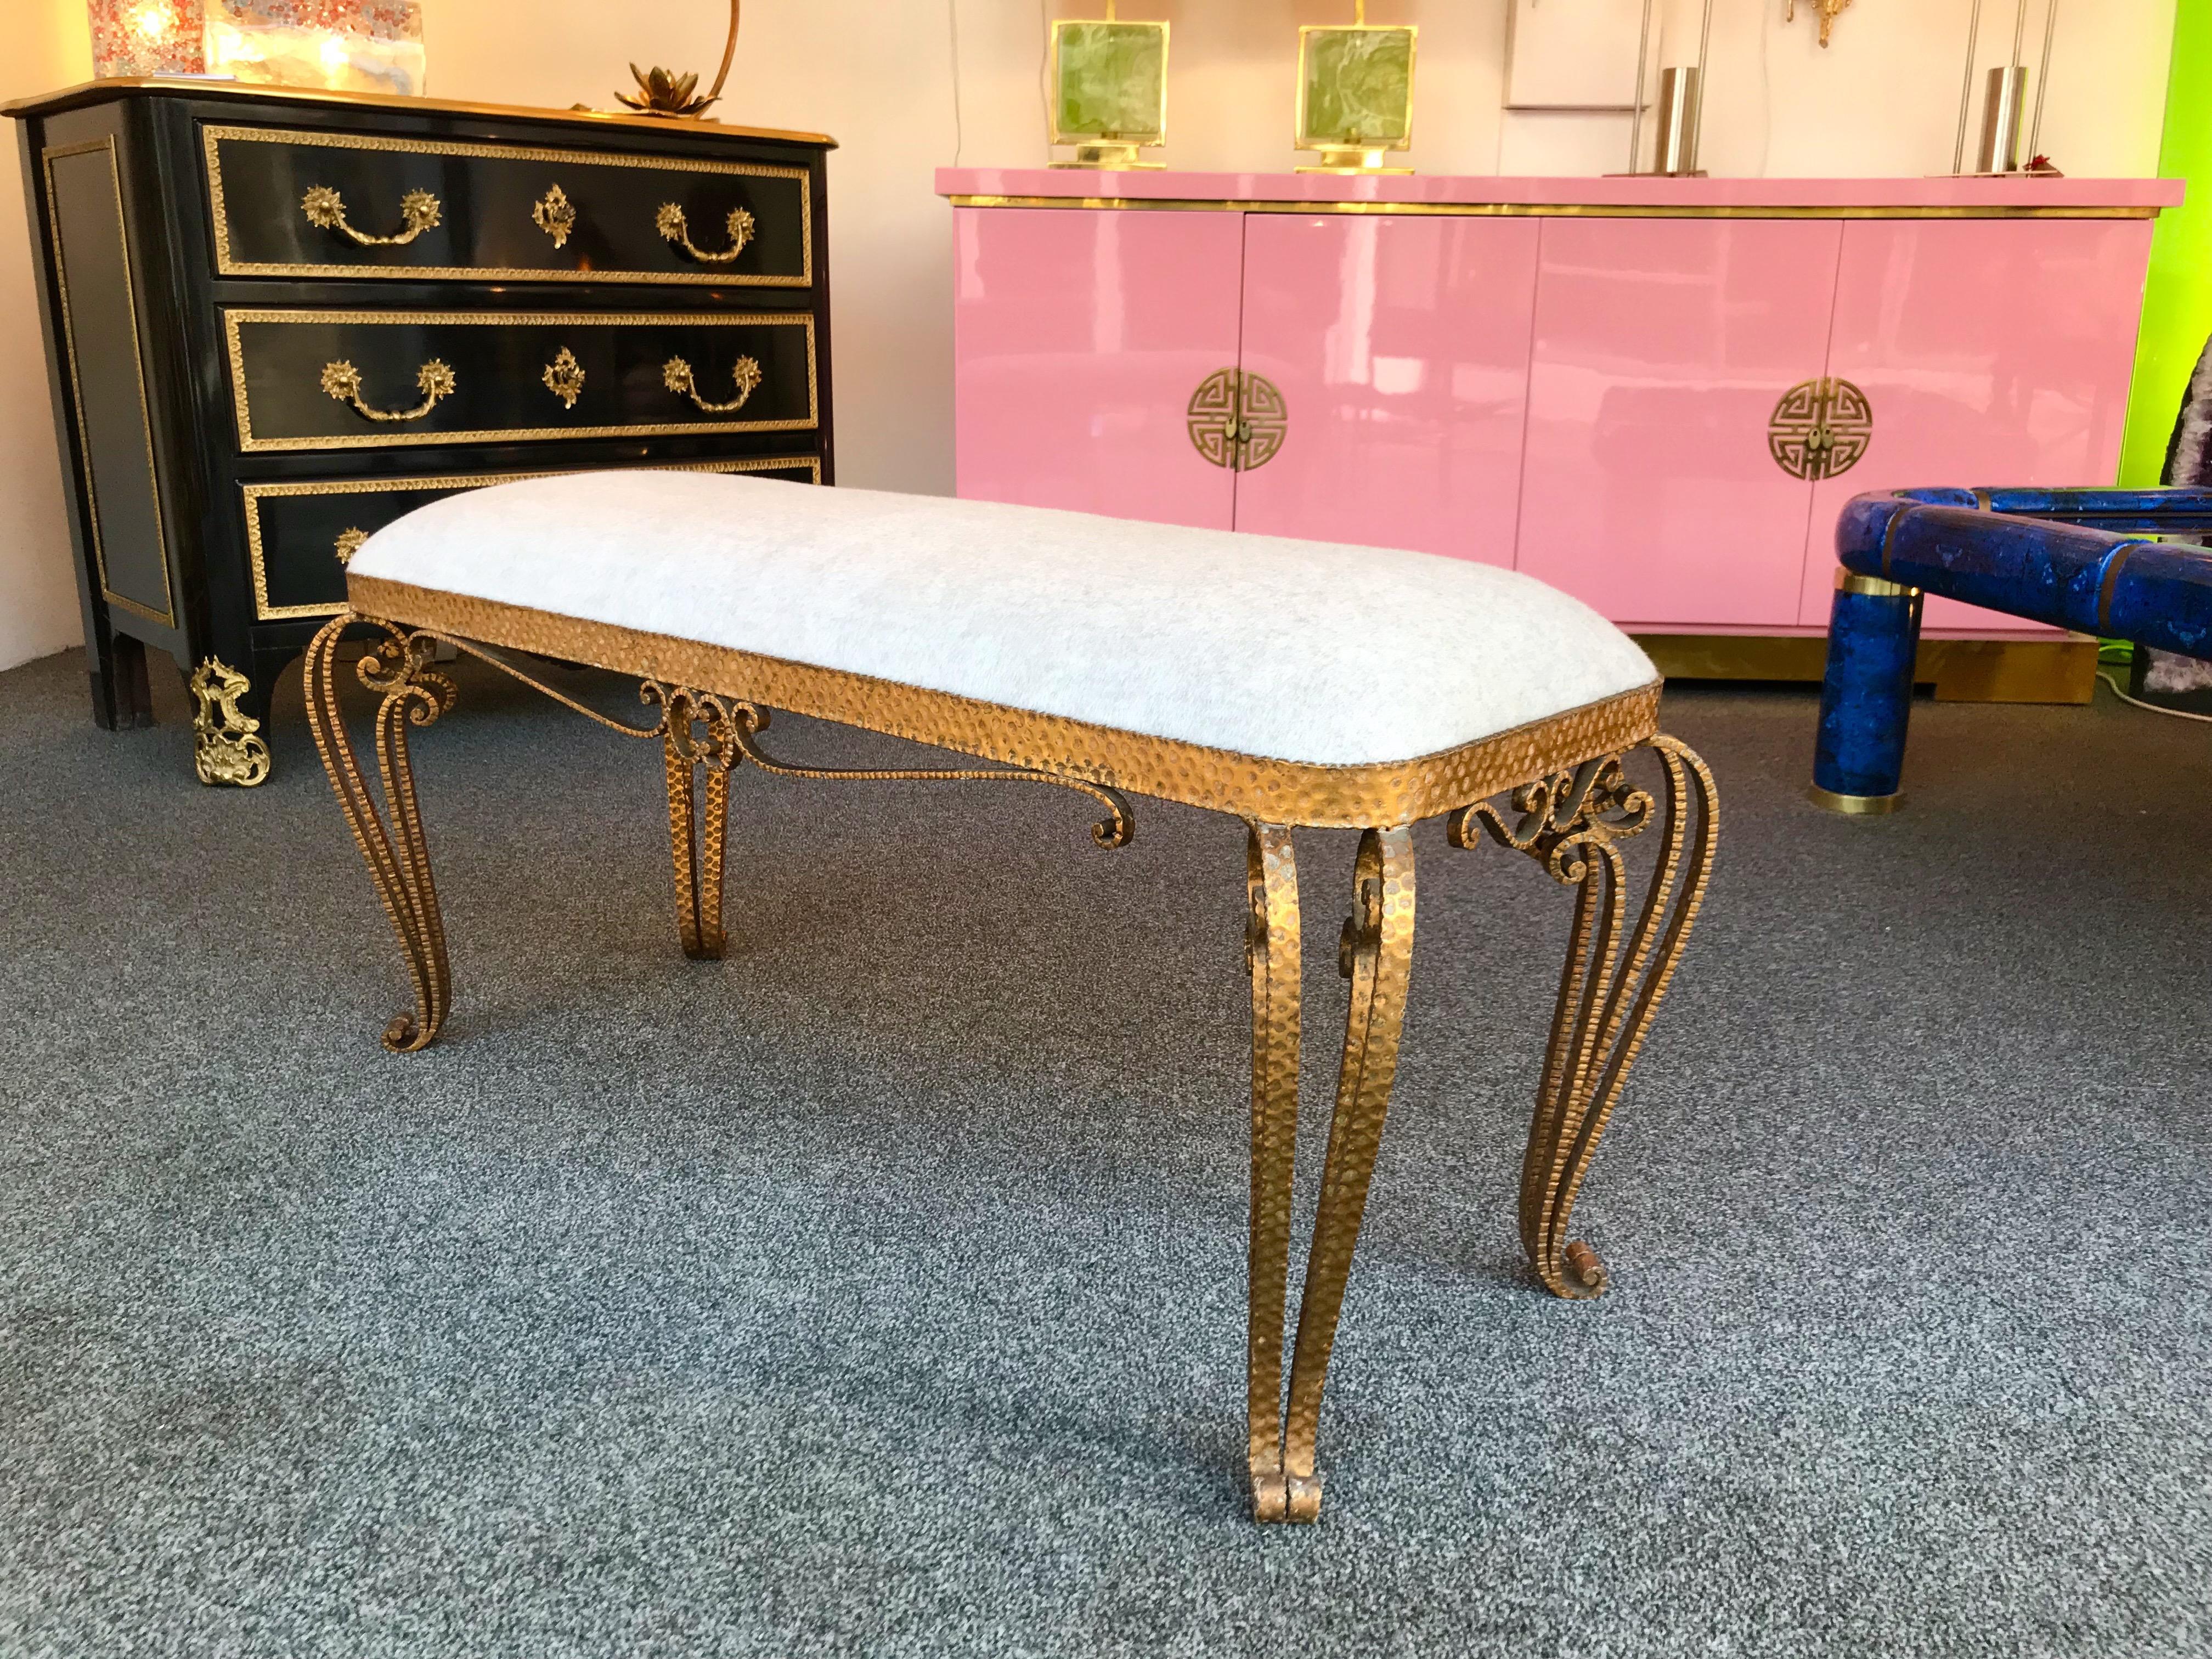 Very fine model of bench by Pier Luigi Colli. Hammered wrought iron and gold leaf . Fully upholstered with a lamb wool and cashmere wool fabric by Bisson Bruneel. The stools and console table are available on my storefront. Famous design like Maison